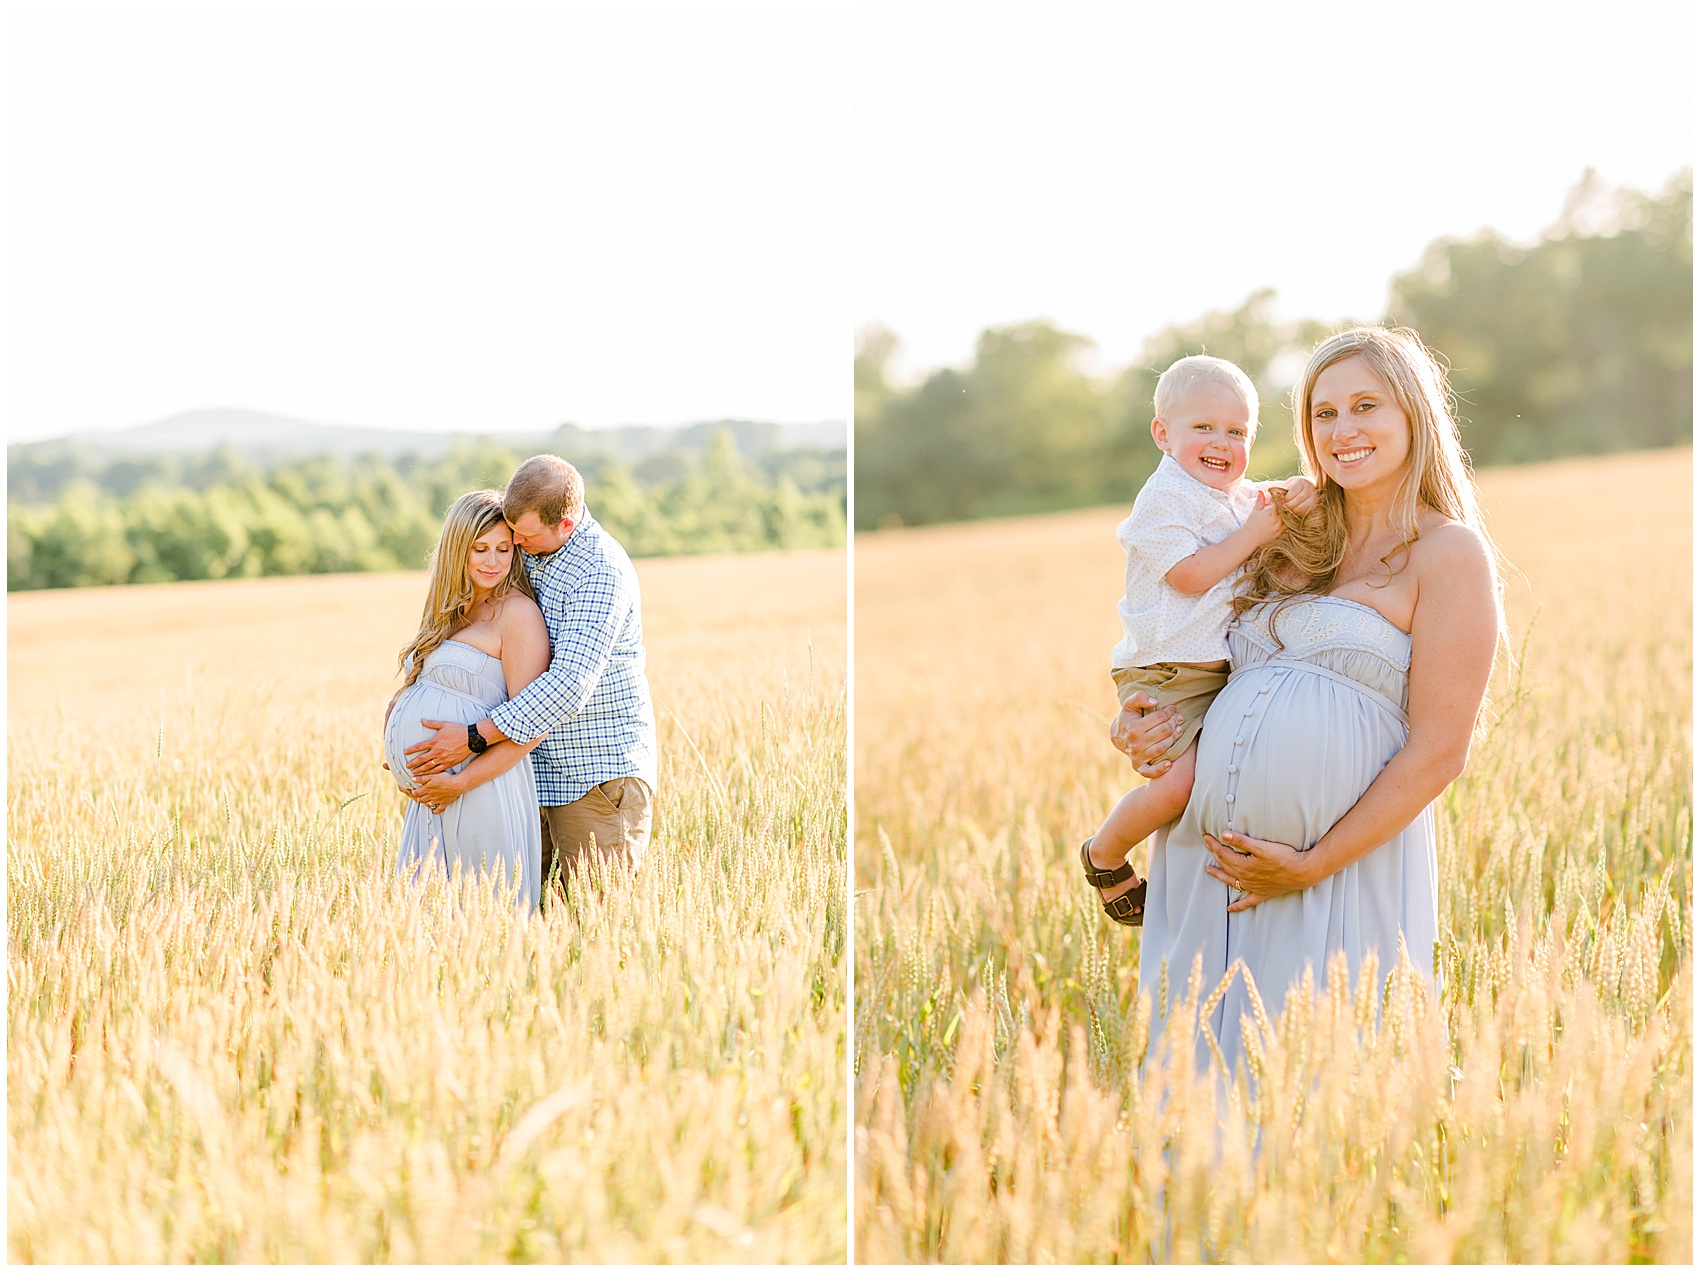 Harvest House and Catering Ramseur NC wheat field maternity session Charleston SC wedding Photographer_0250.jpg